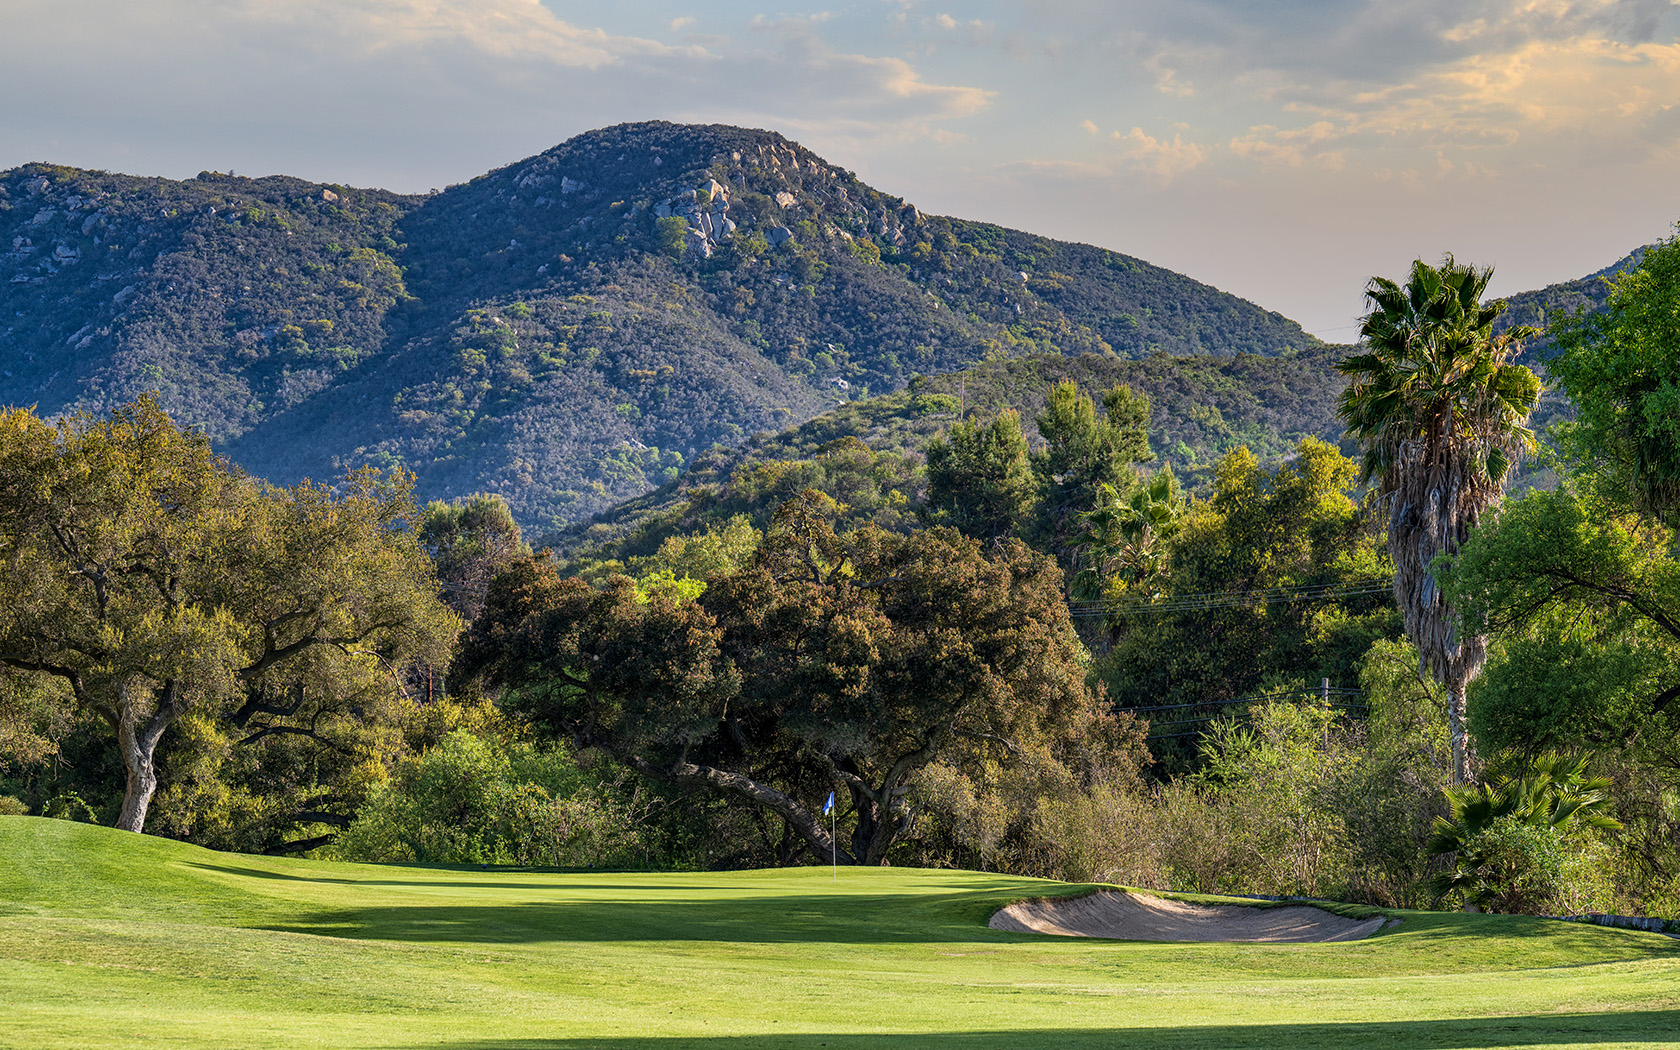 close up of the small hills and tall mountains located just beyond the golf course